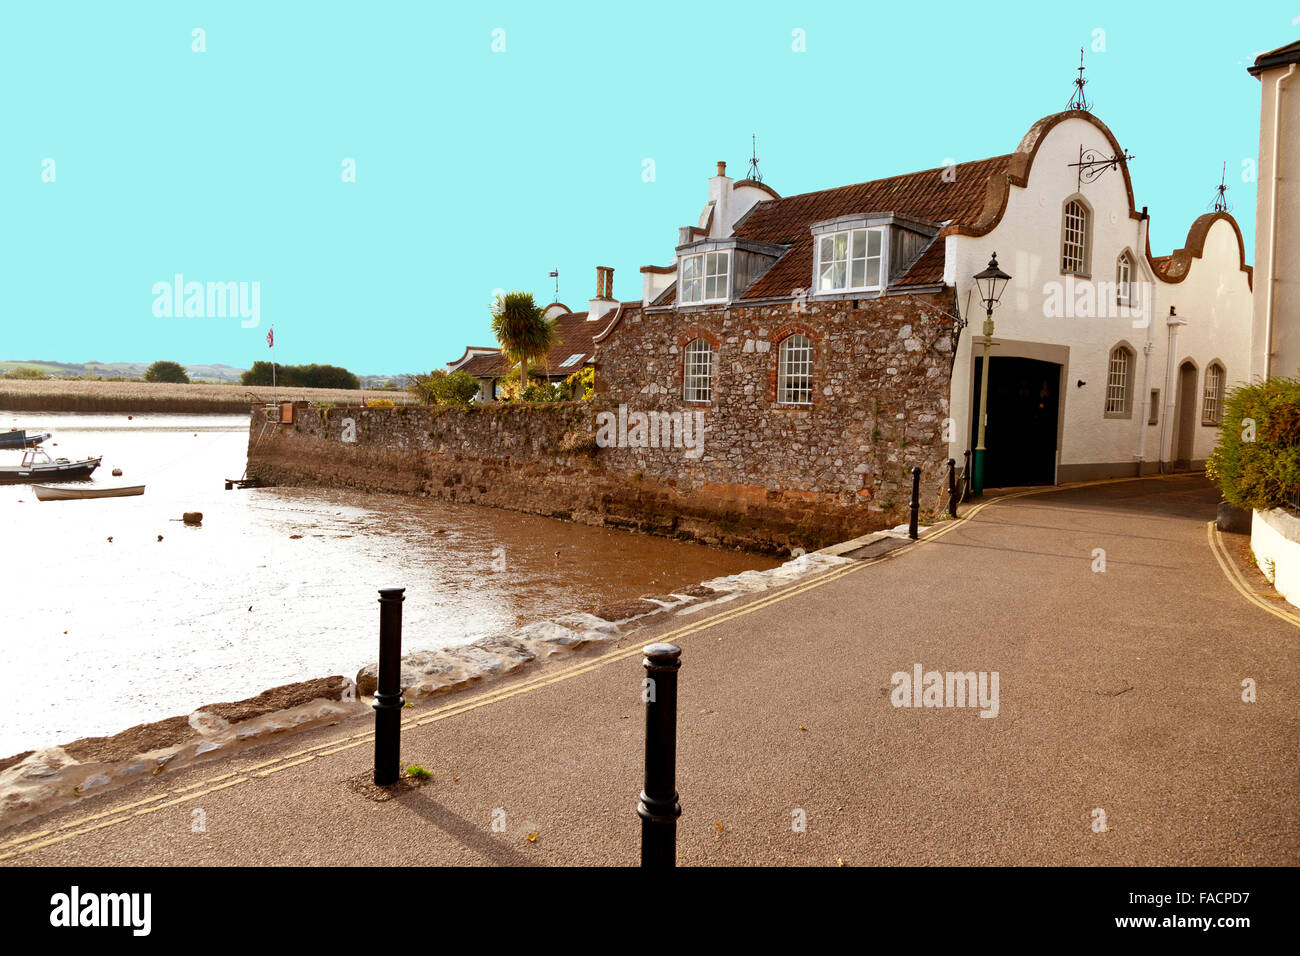 The 'dutch gable' architecture is a feature of this house in Ferry Road, Topsham, Devon, England, UK Stock Photo